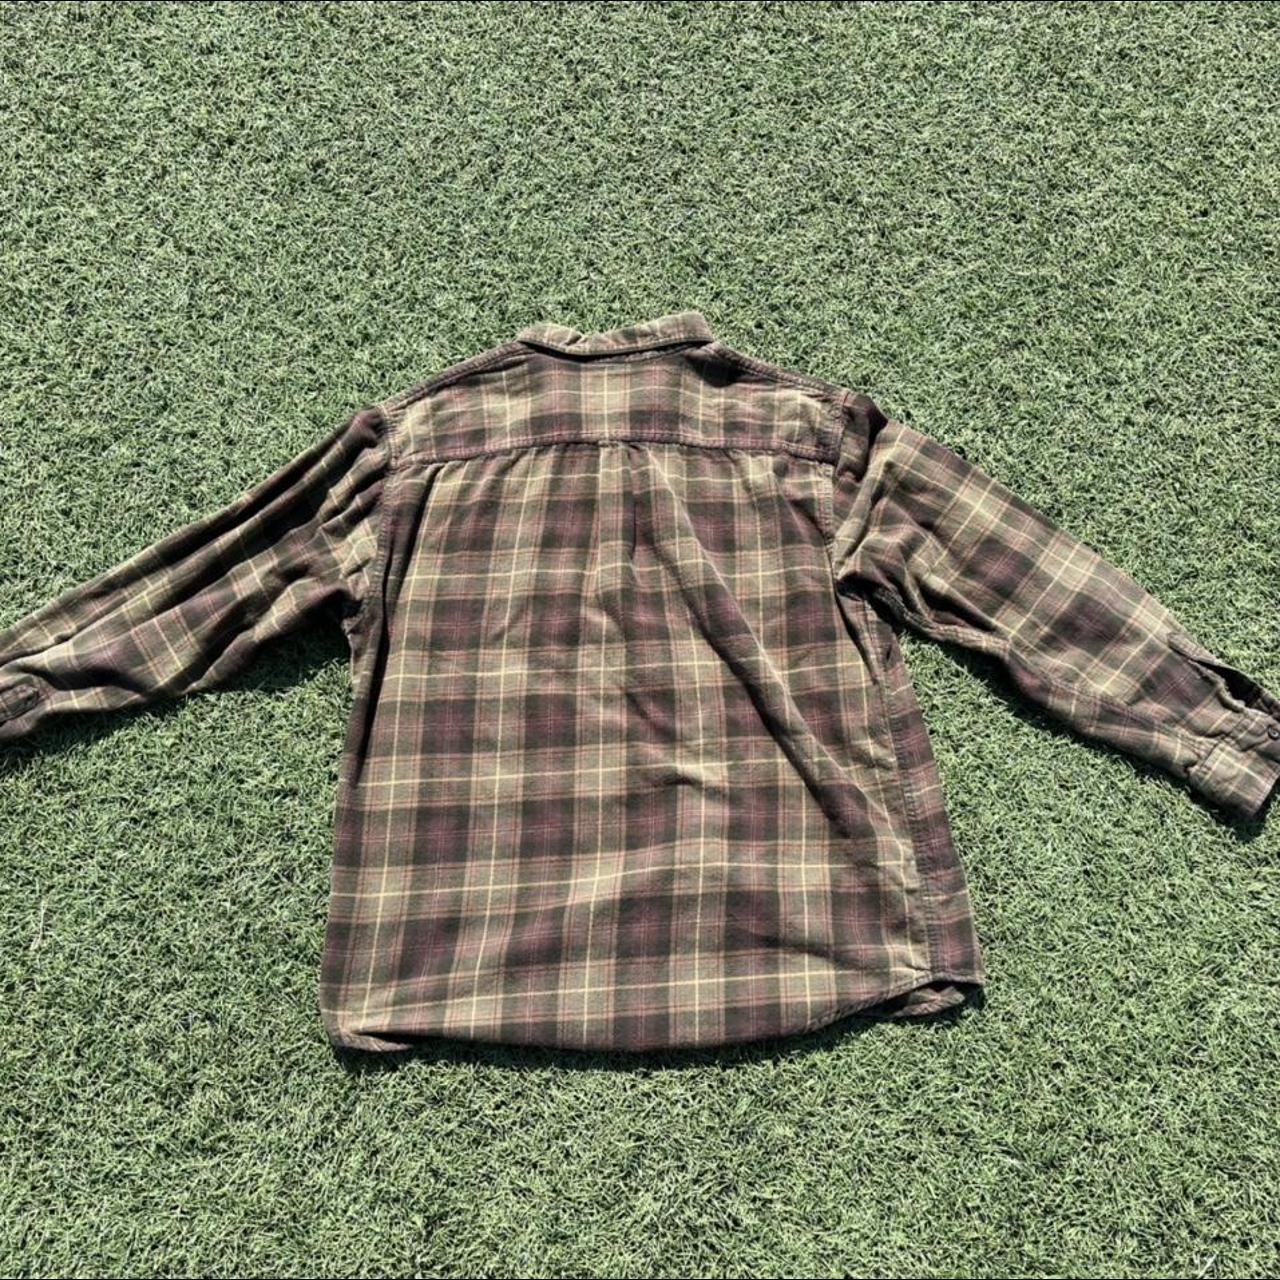 Product Image 4 - G.H. Bass - Flannel 👕

Size